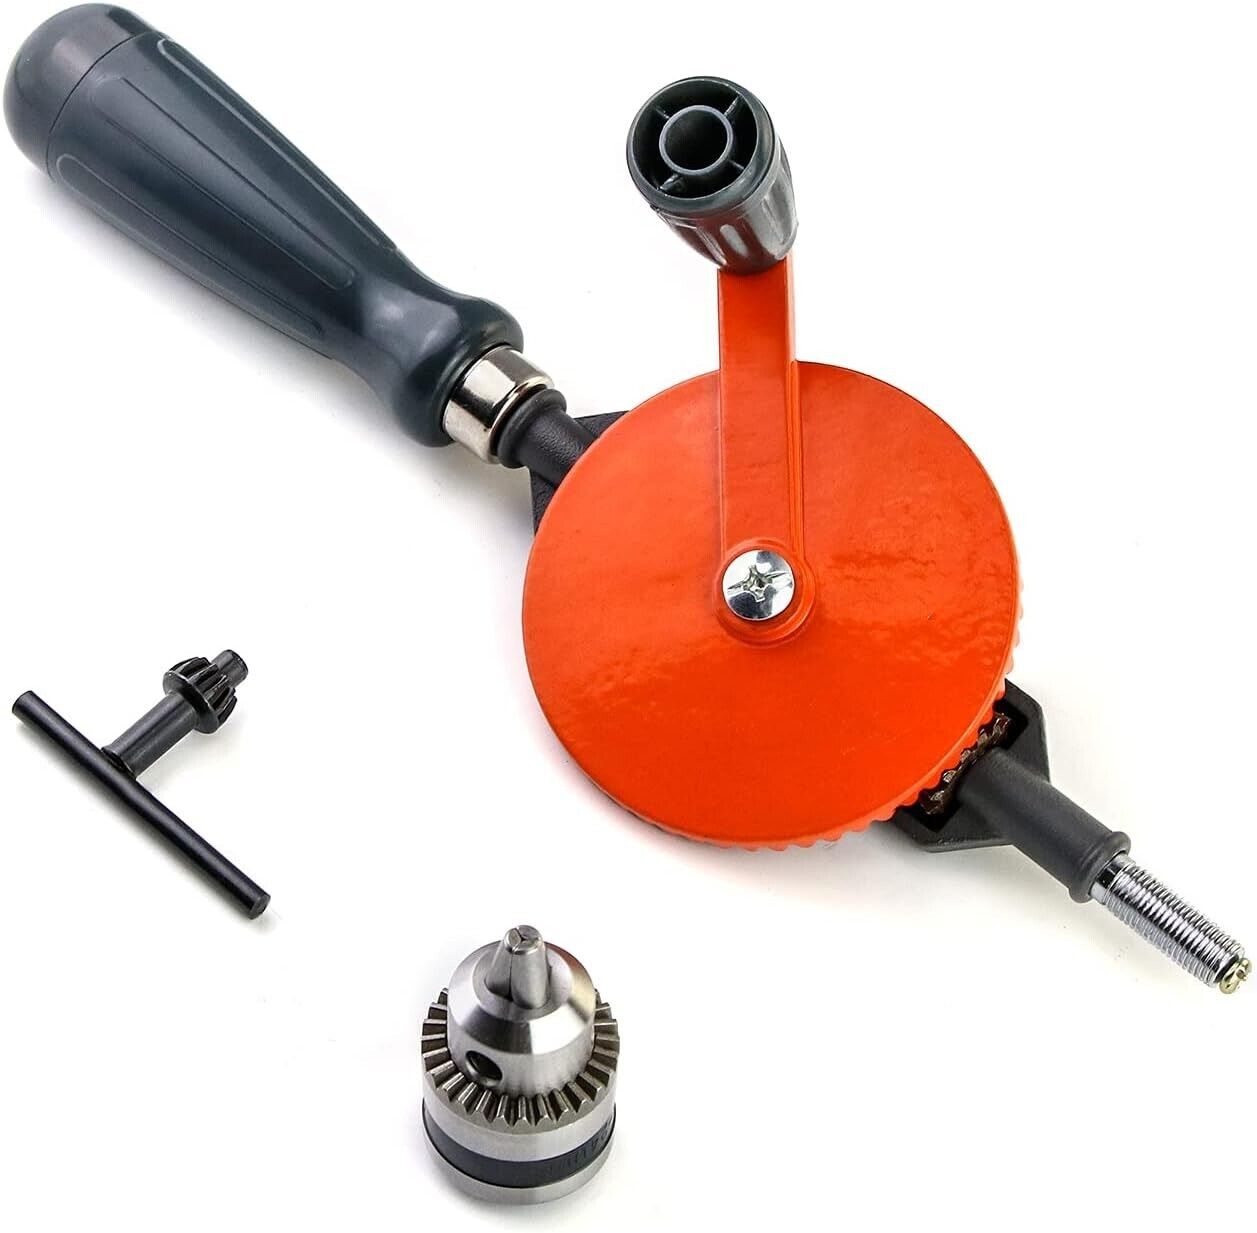 1/4-Inch Manual Hand DrillCapacity with Finely Cast Steel Double Pinions Design